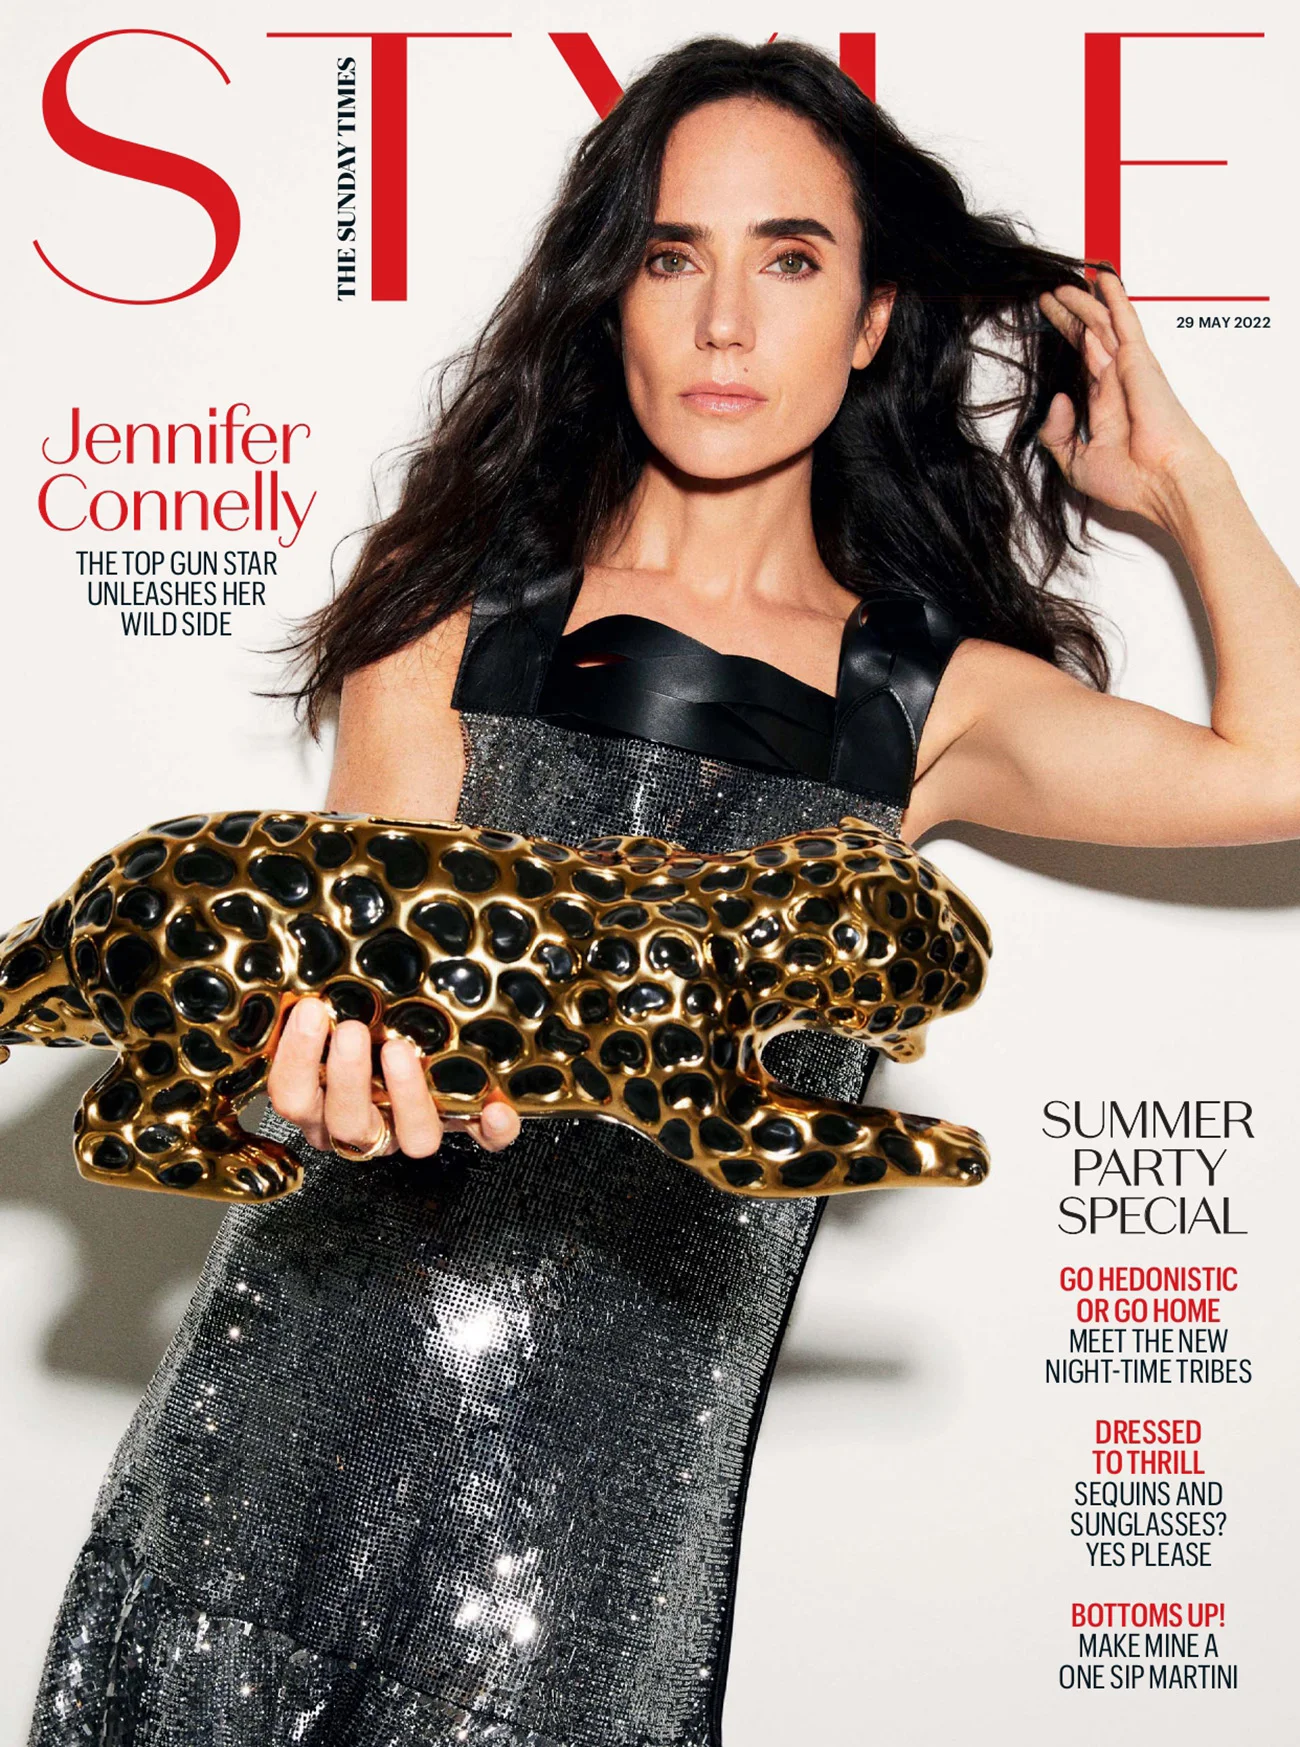 Jennifer Connelly covers The Sunday Times Style May 29th, 2022 by